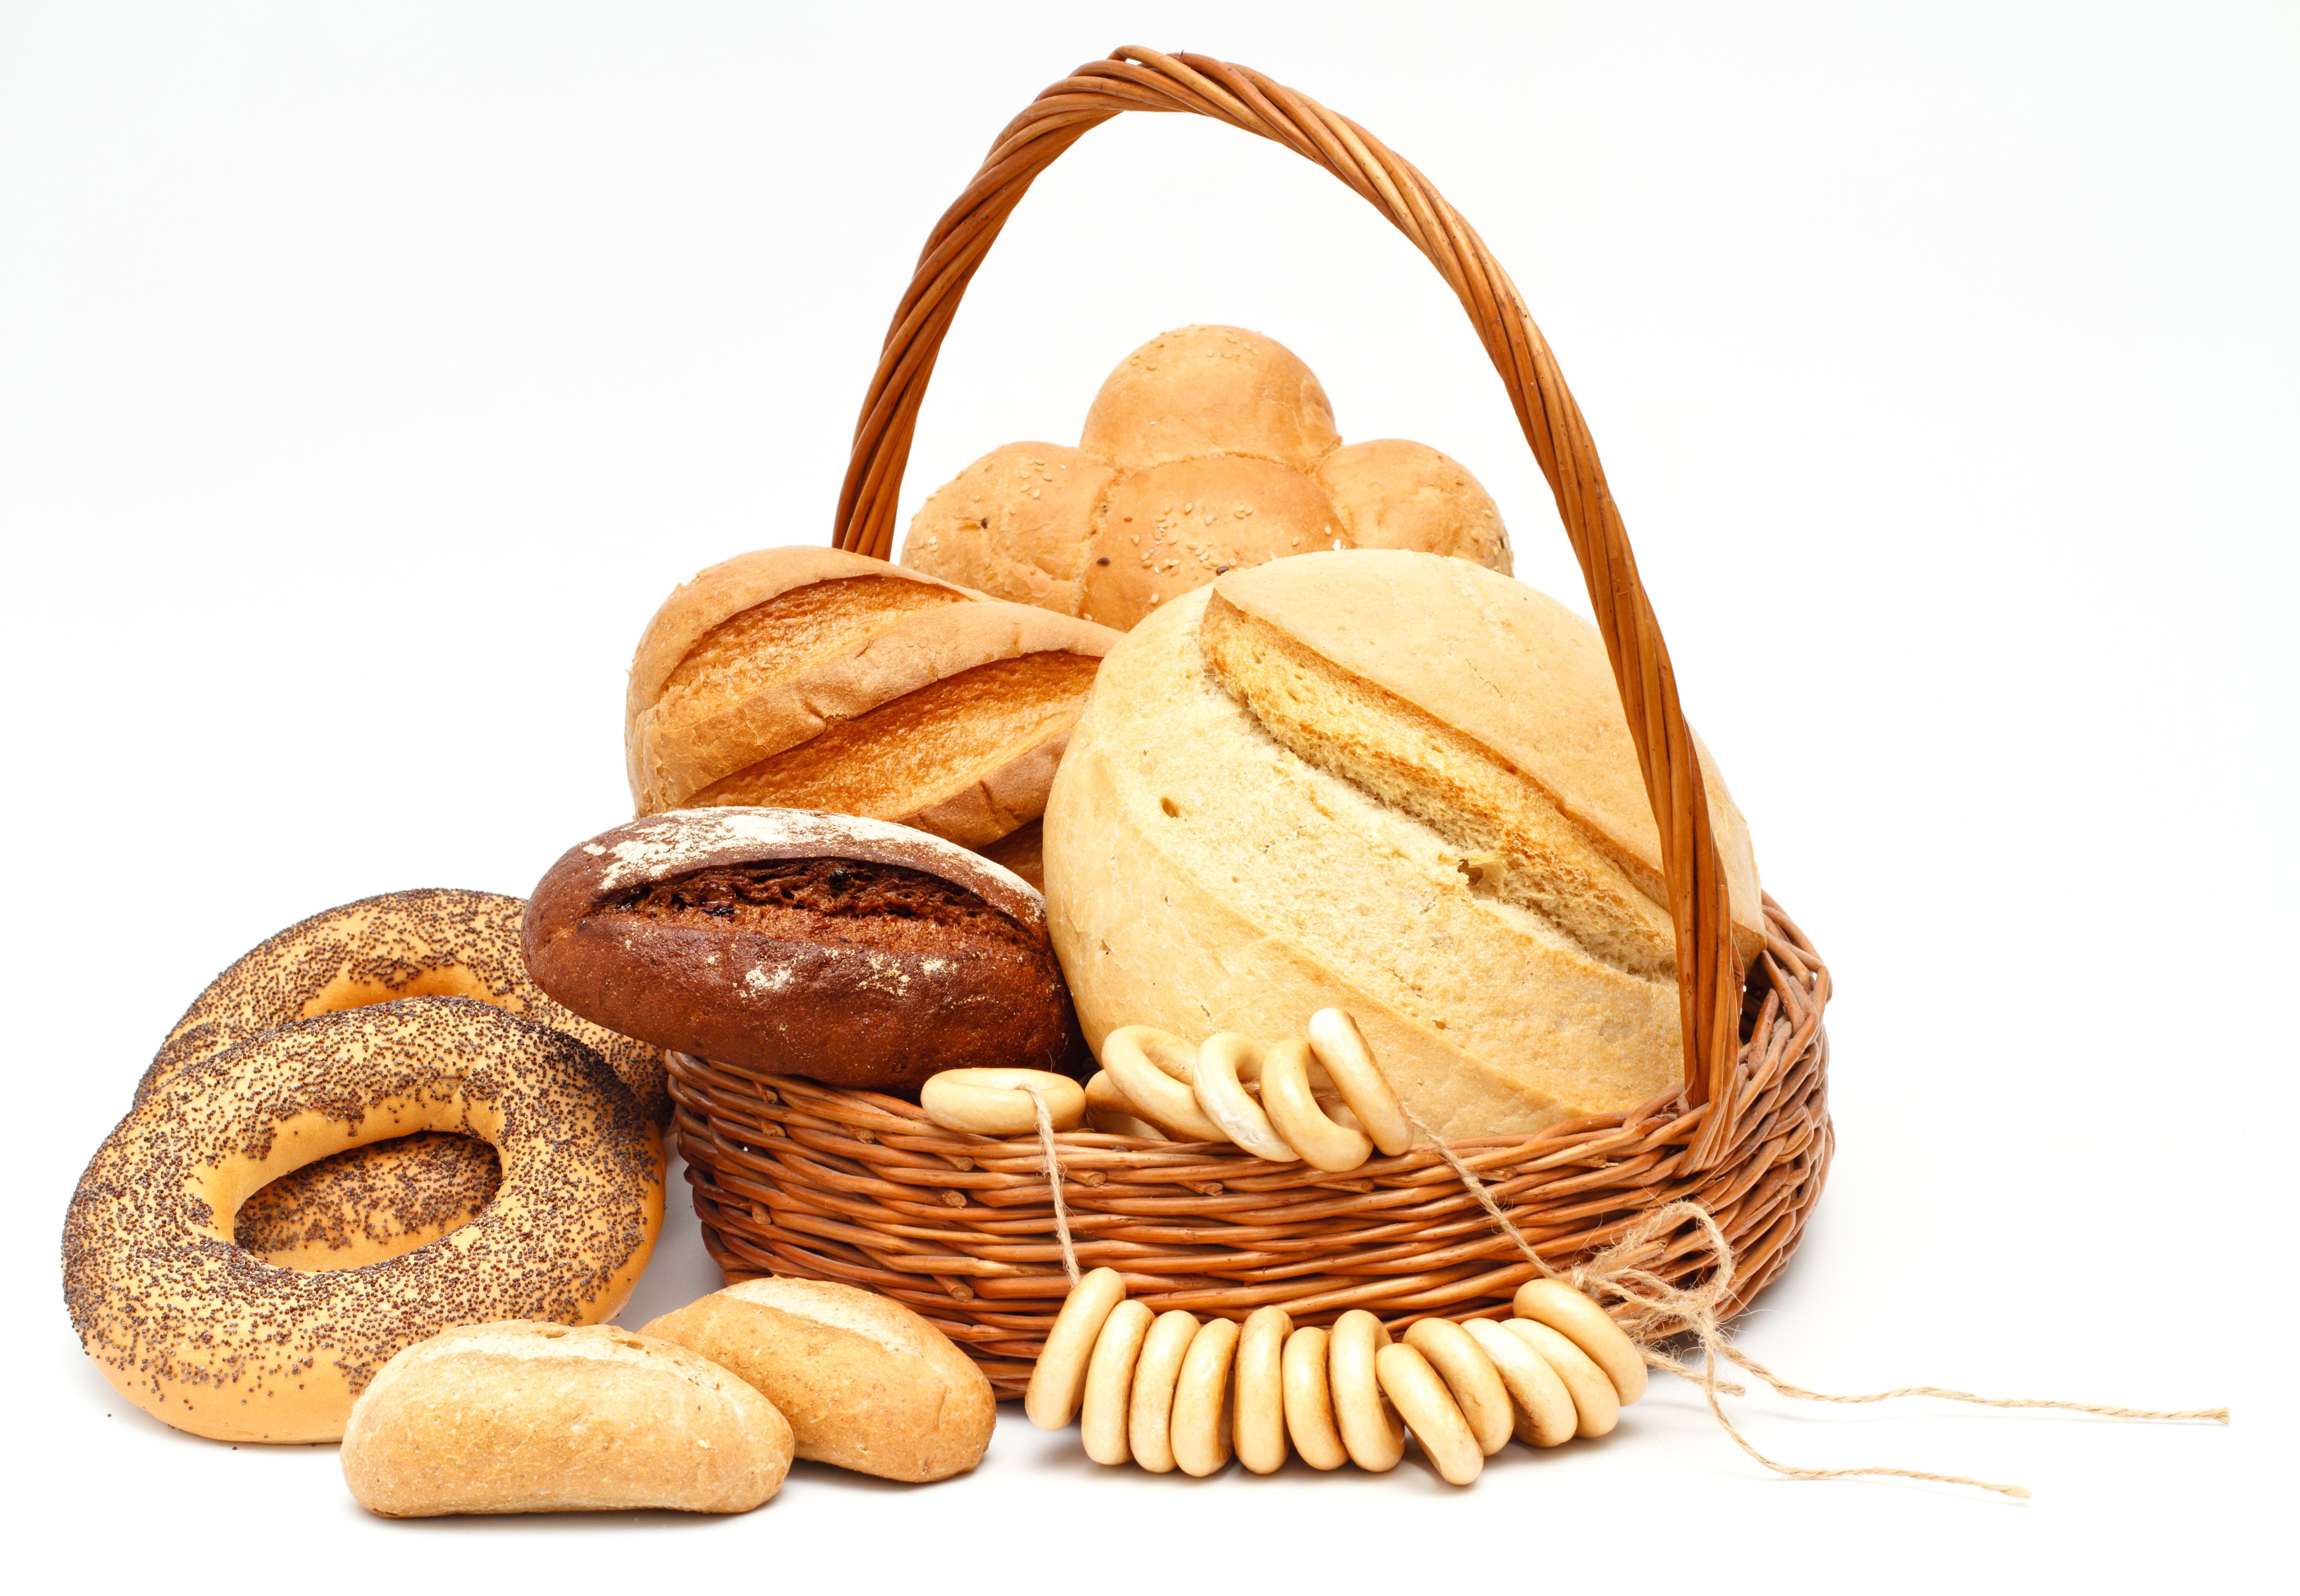 Wallpaper, bread, white background, basket, produce, flavor, grass family, baked goods, snack food, whole grain, bagel 4980x3456